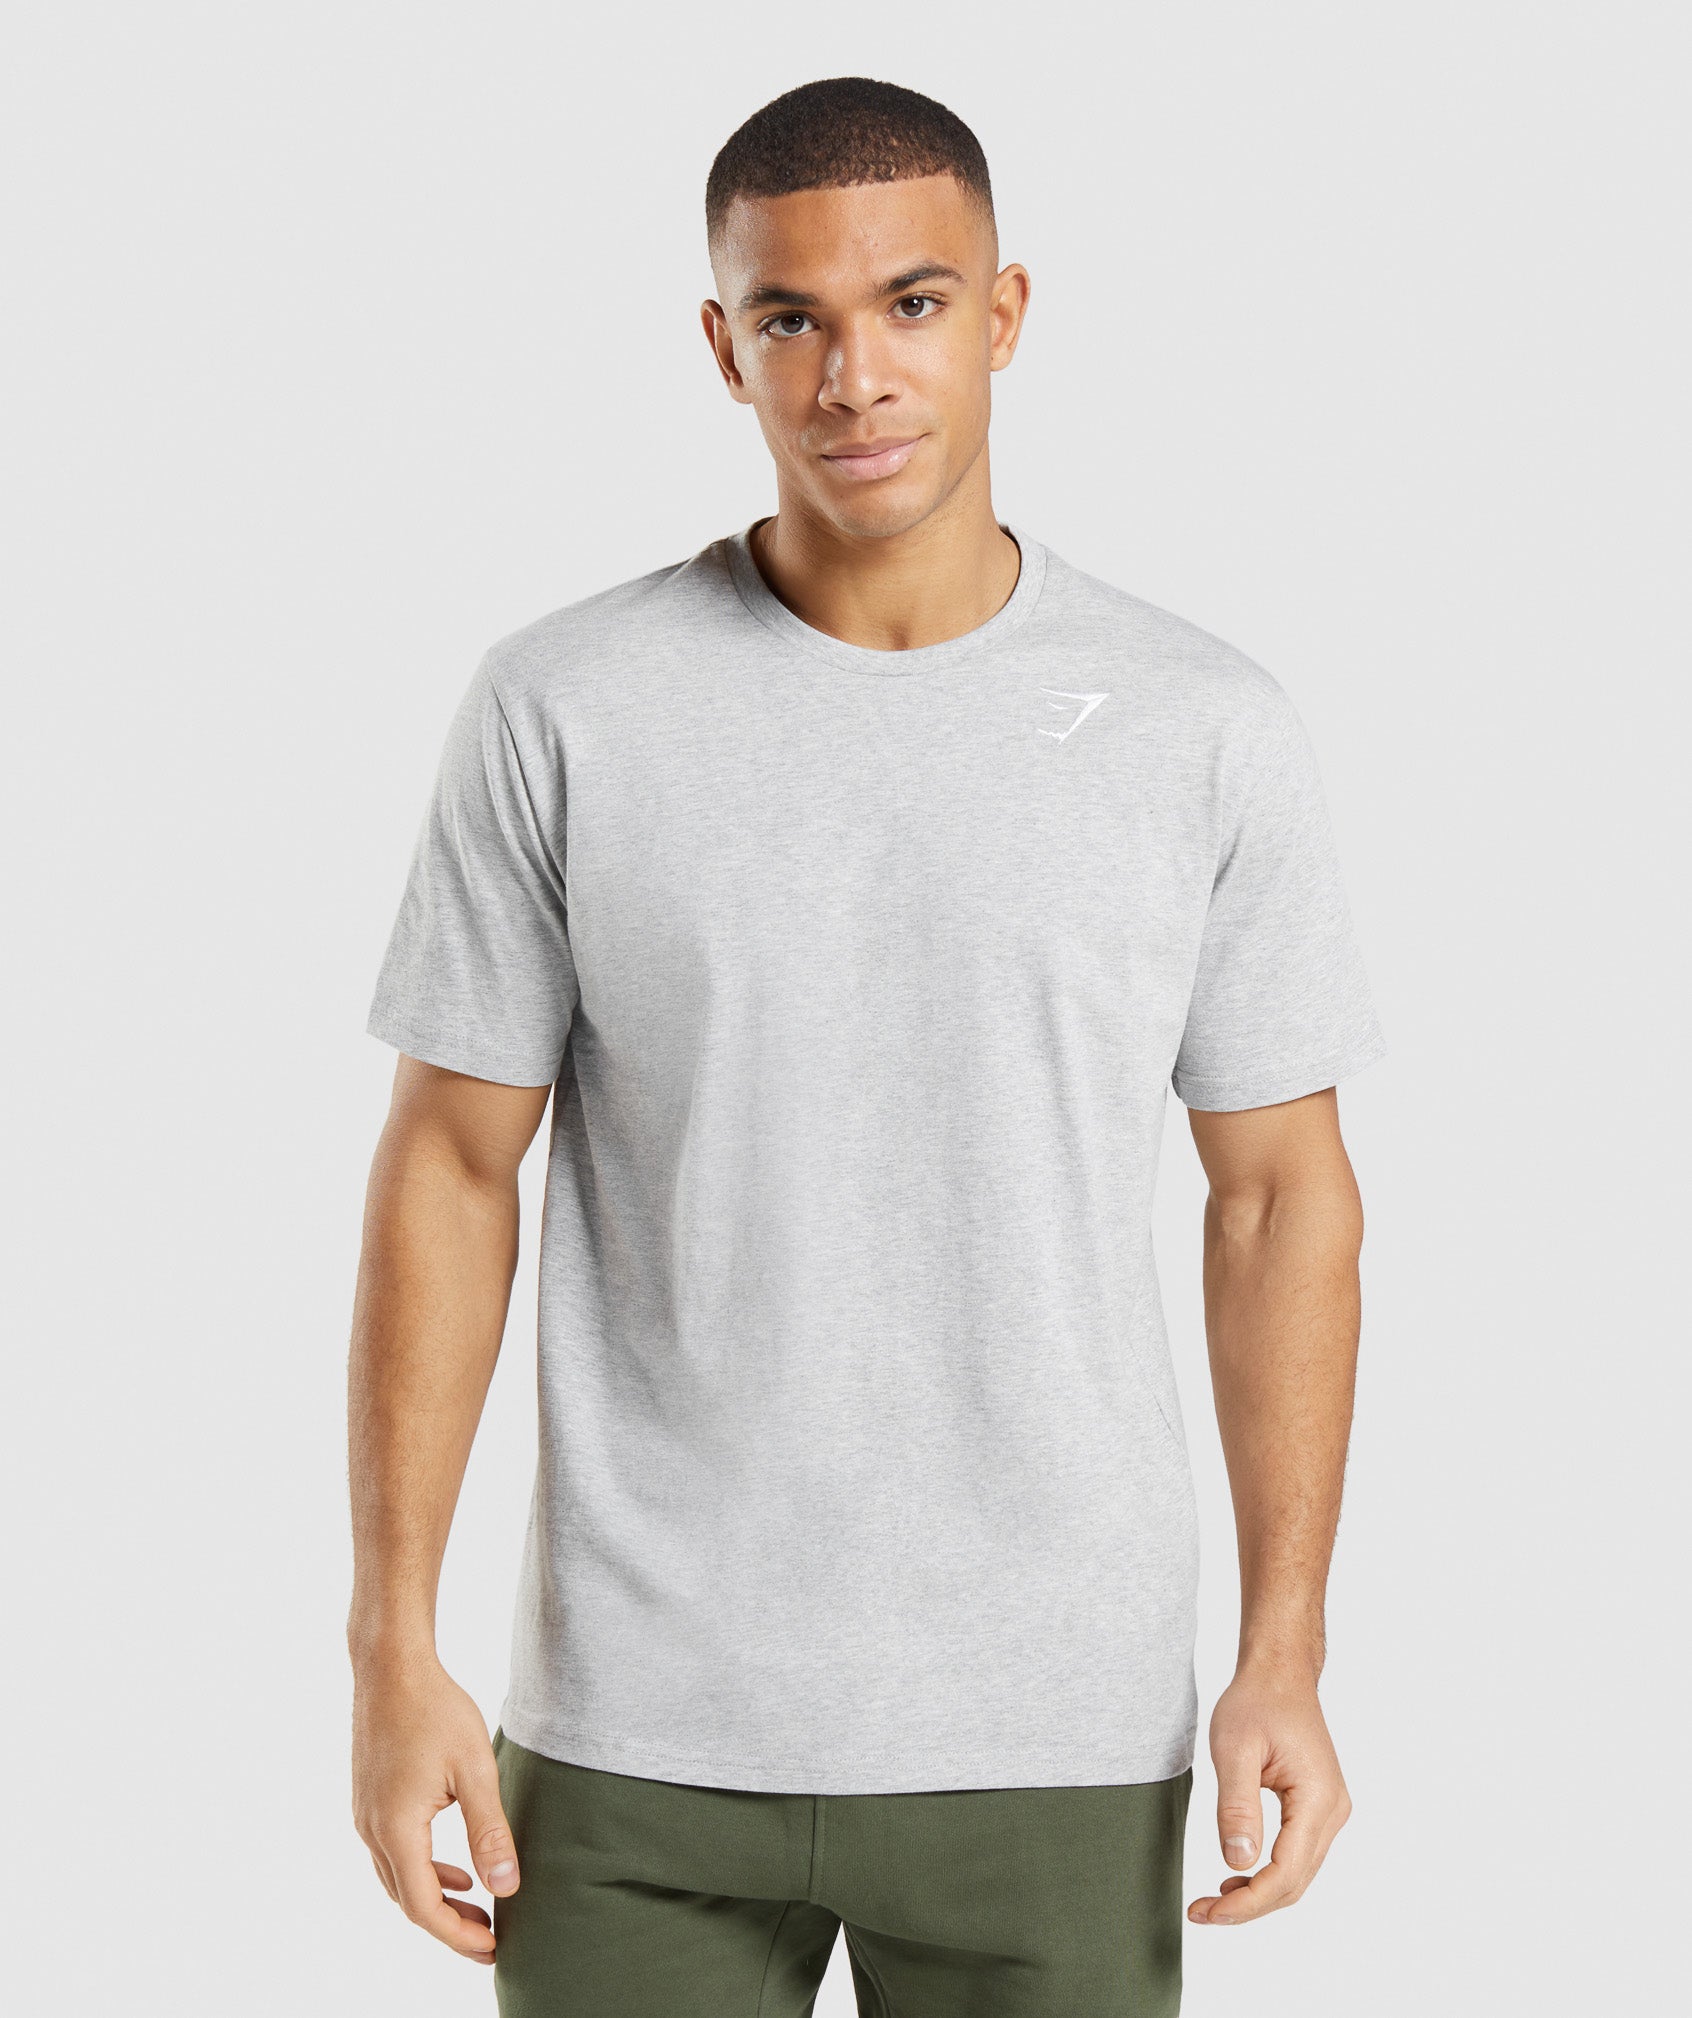 Crest T-Shirt in Light Grey Marl is out of stock